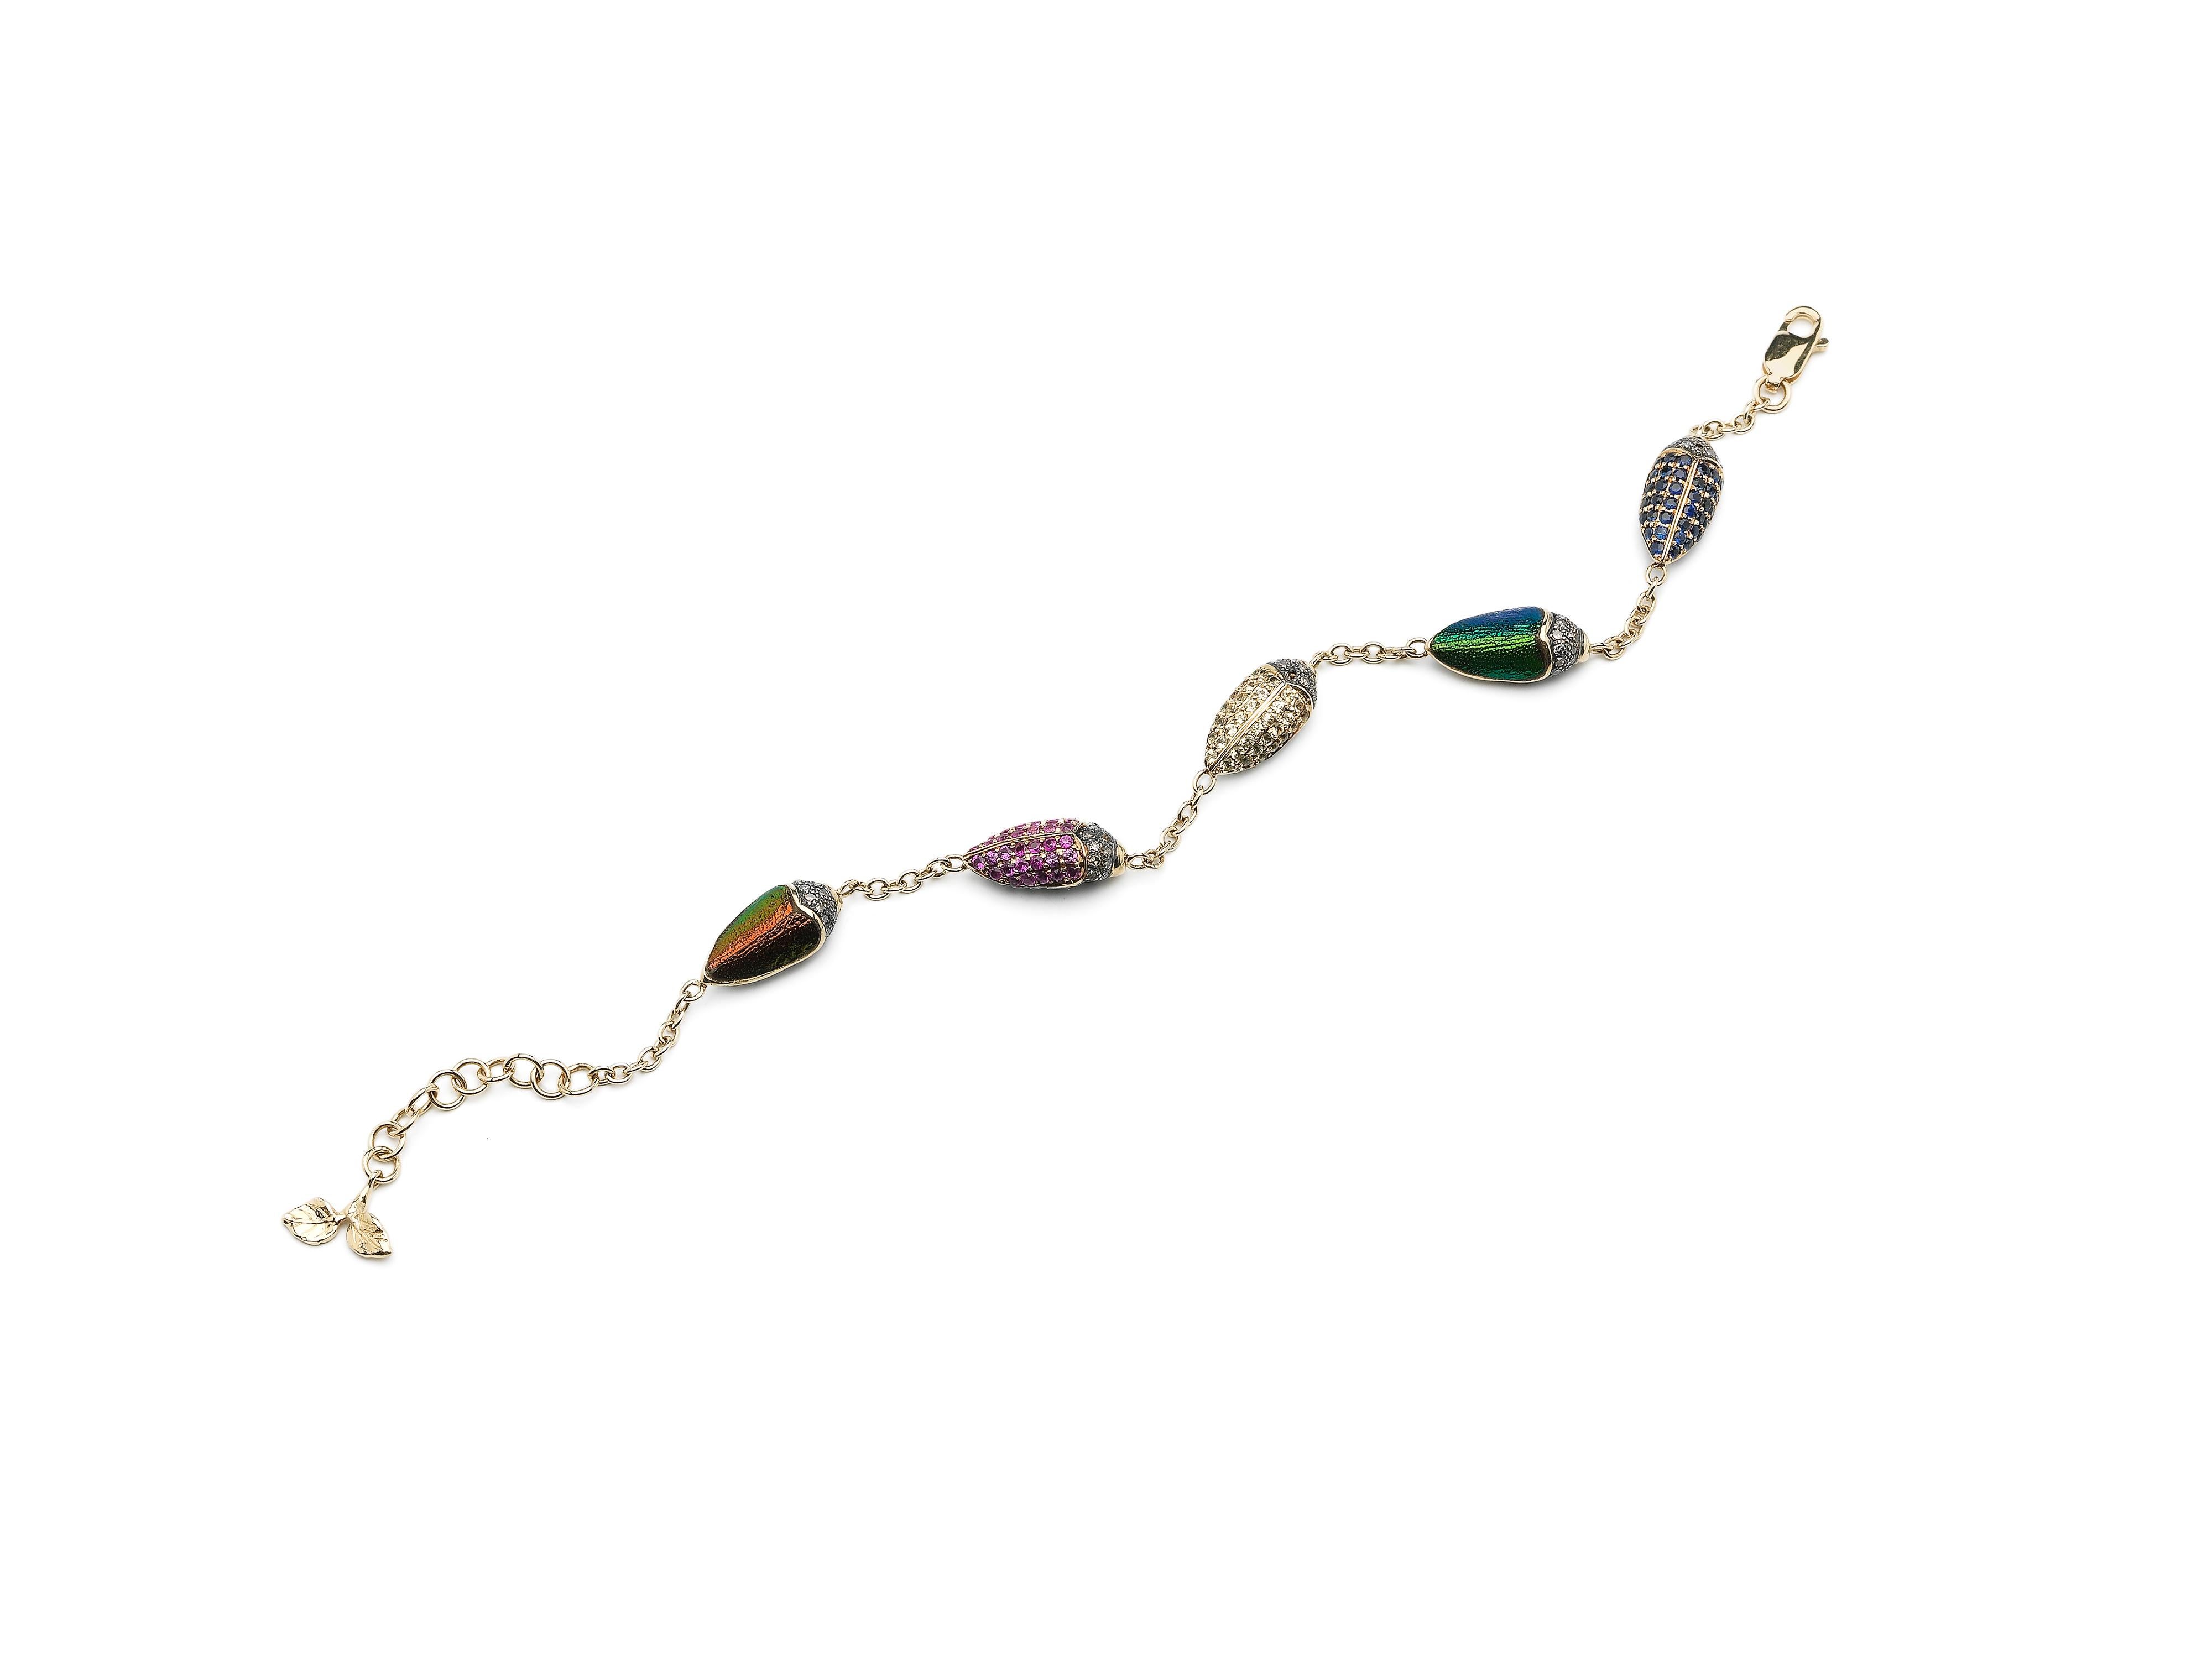 Five scarabs sit like dazzling charms on this 18k yellow gold and sterling silver bracelet. The scarabs shown here are set with real scarab wings, brown diamonds, blue sapphires, and tsavorites, but the design can be personalised so it’s unique to